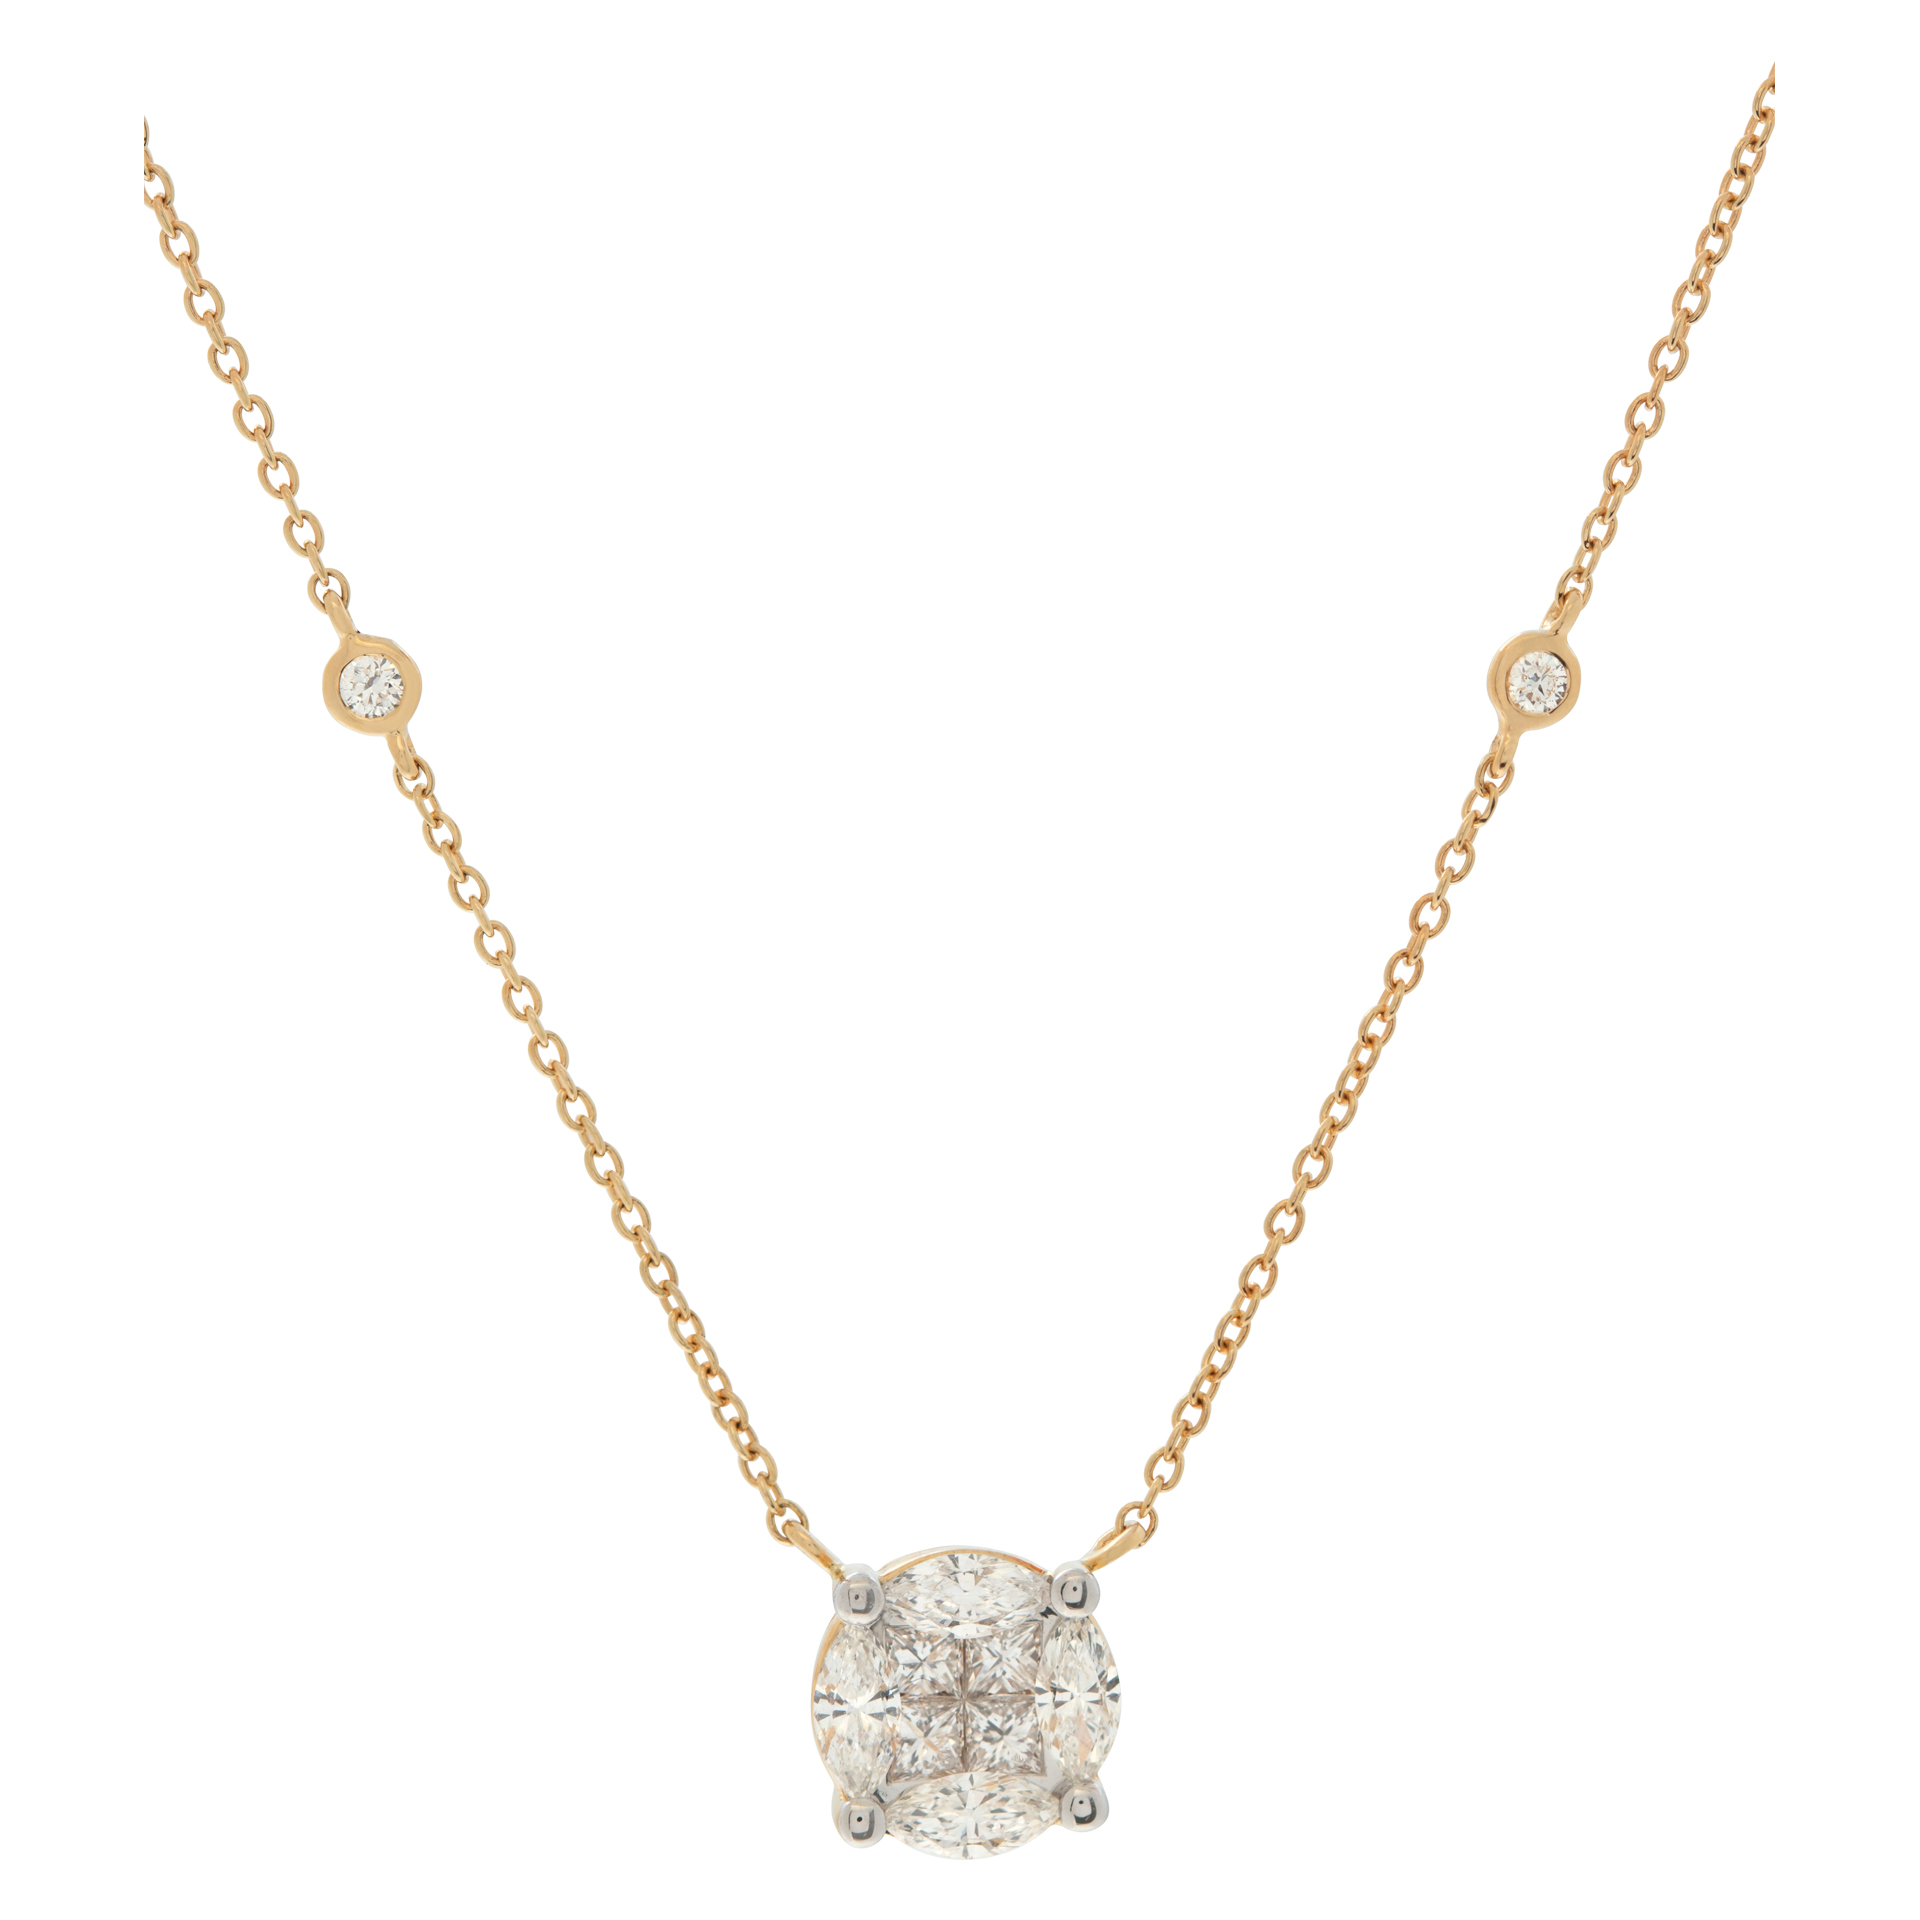 Illusion set diamond pendant necklace in 18k yellow gold with 1.14 carats image 1